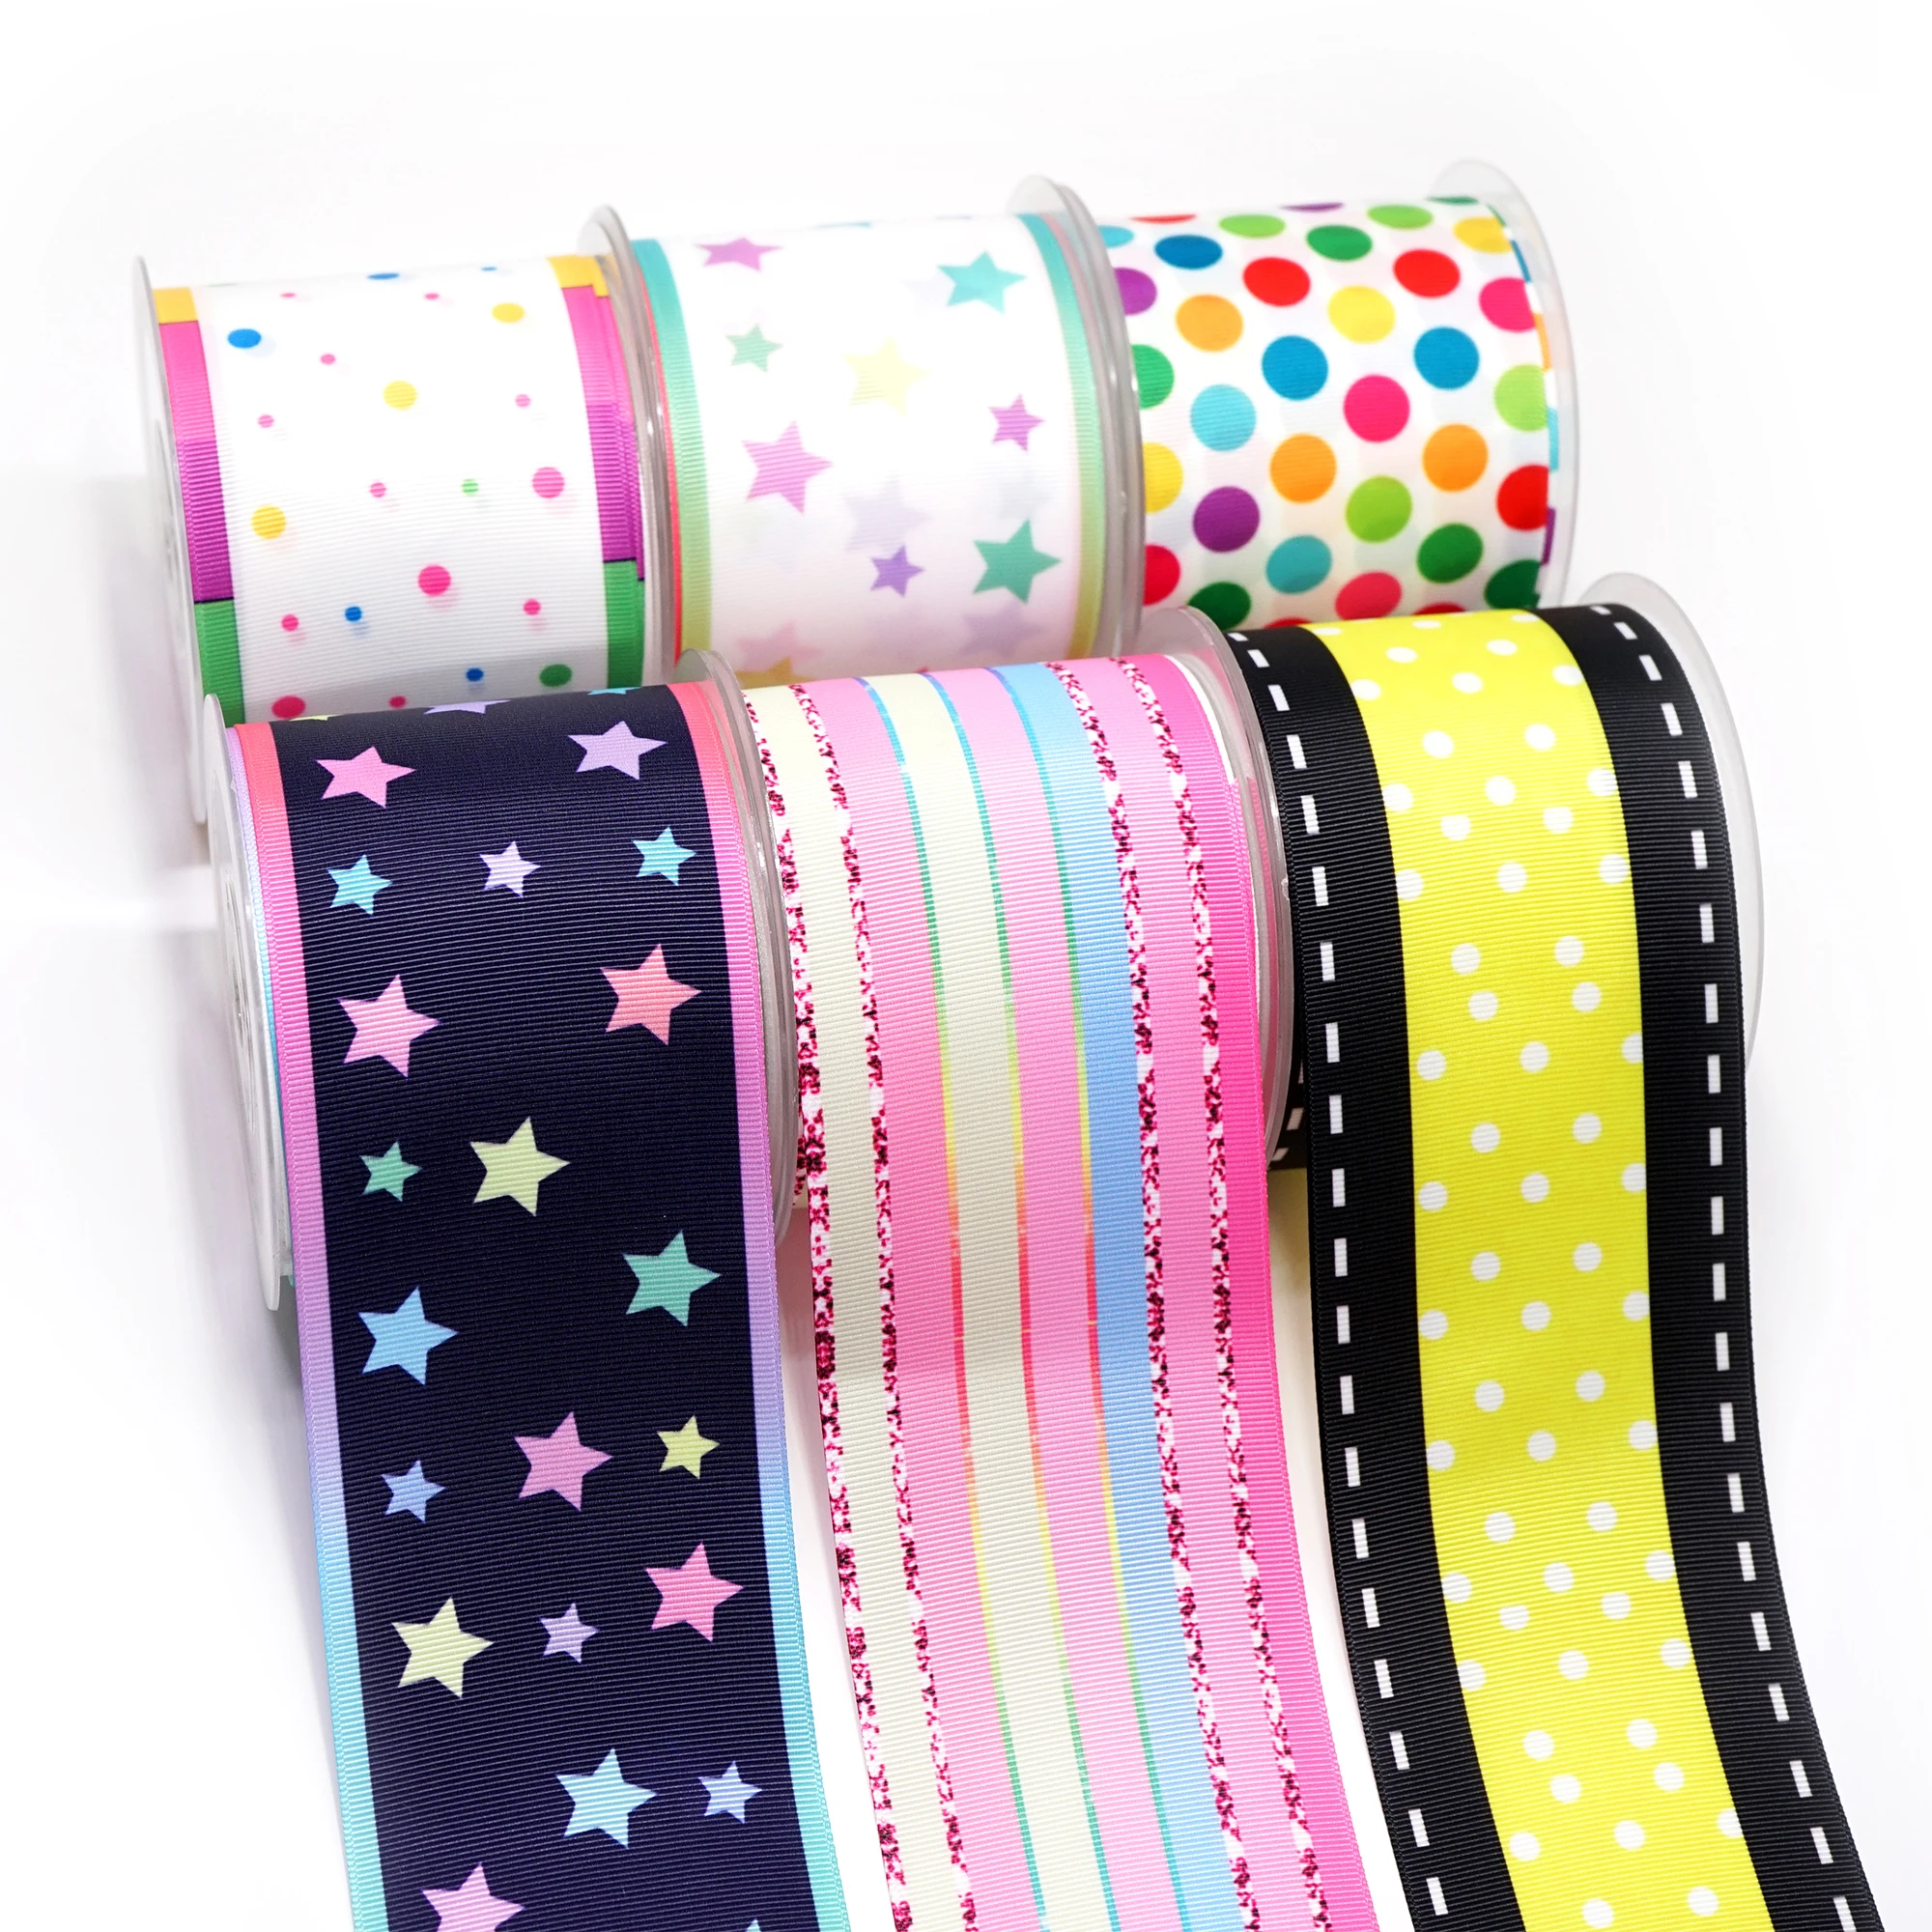 Colorful Grosgrain/Satin The Star Shine Ribbon Printed For Crafts Decoration Bow 10Yards 43564 | Дом и сад